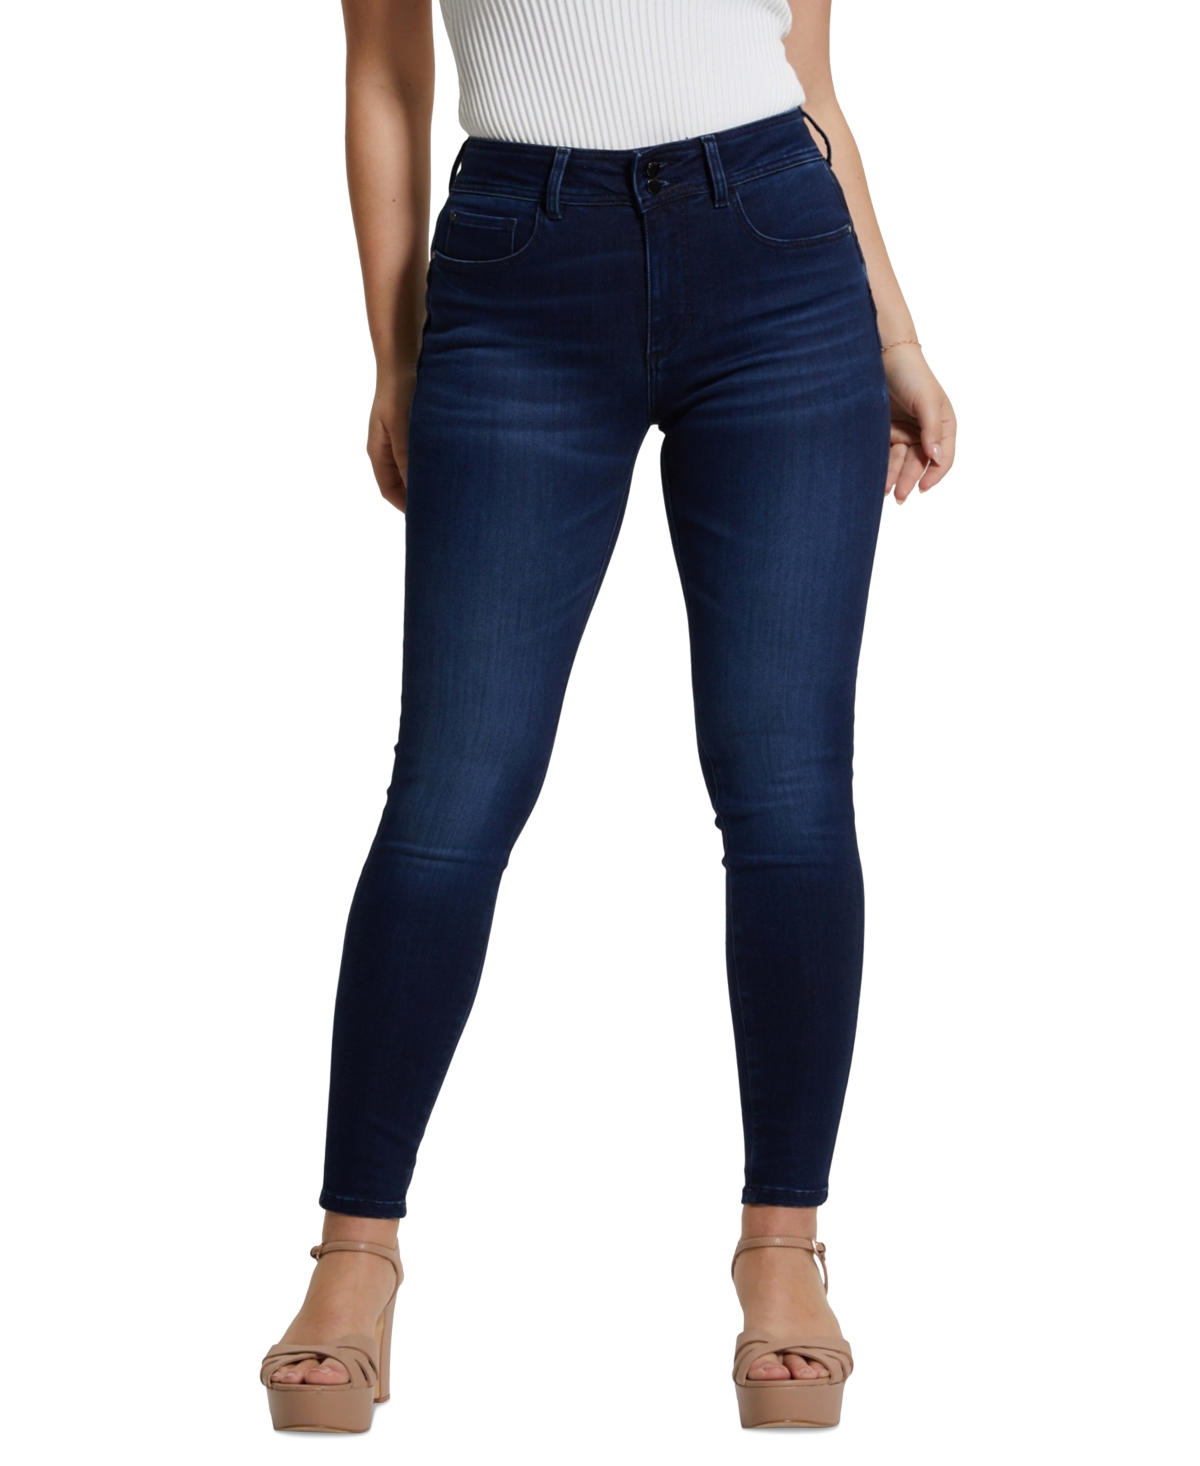 Guess Women's Shape-up High-rise Skinny Jeans In Warm Ocean